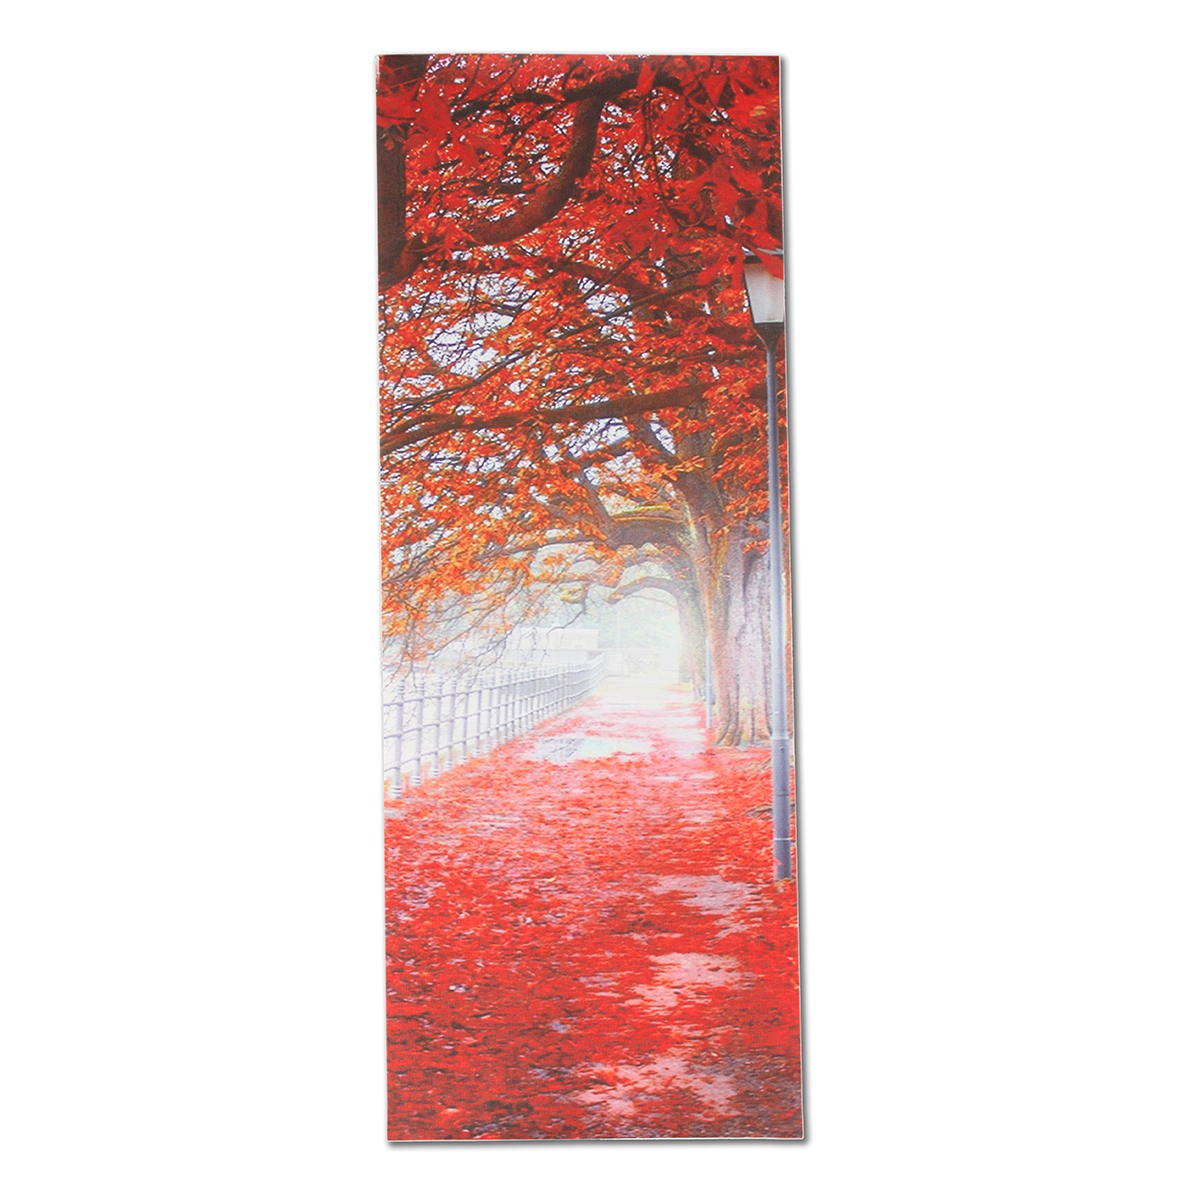 5Pcs-Red-Falling-Leaves-Canvas-Painting-Autumn-Tree-Wall-Decorative-Print-Art-Pictures-Unframed-Wall-1809936-9